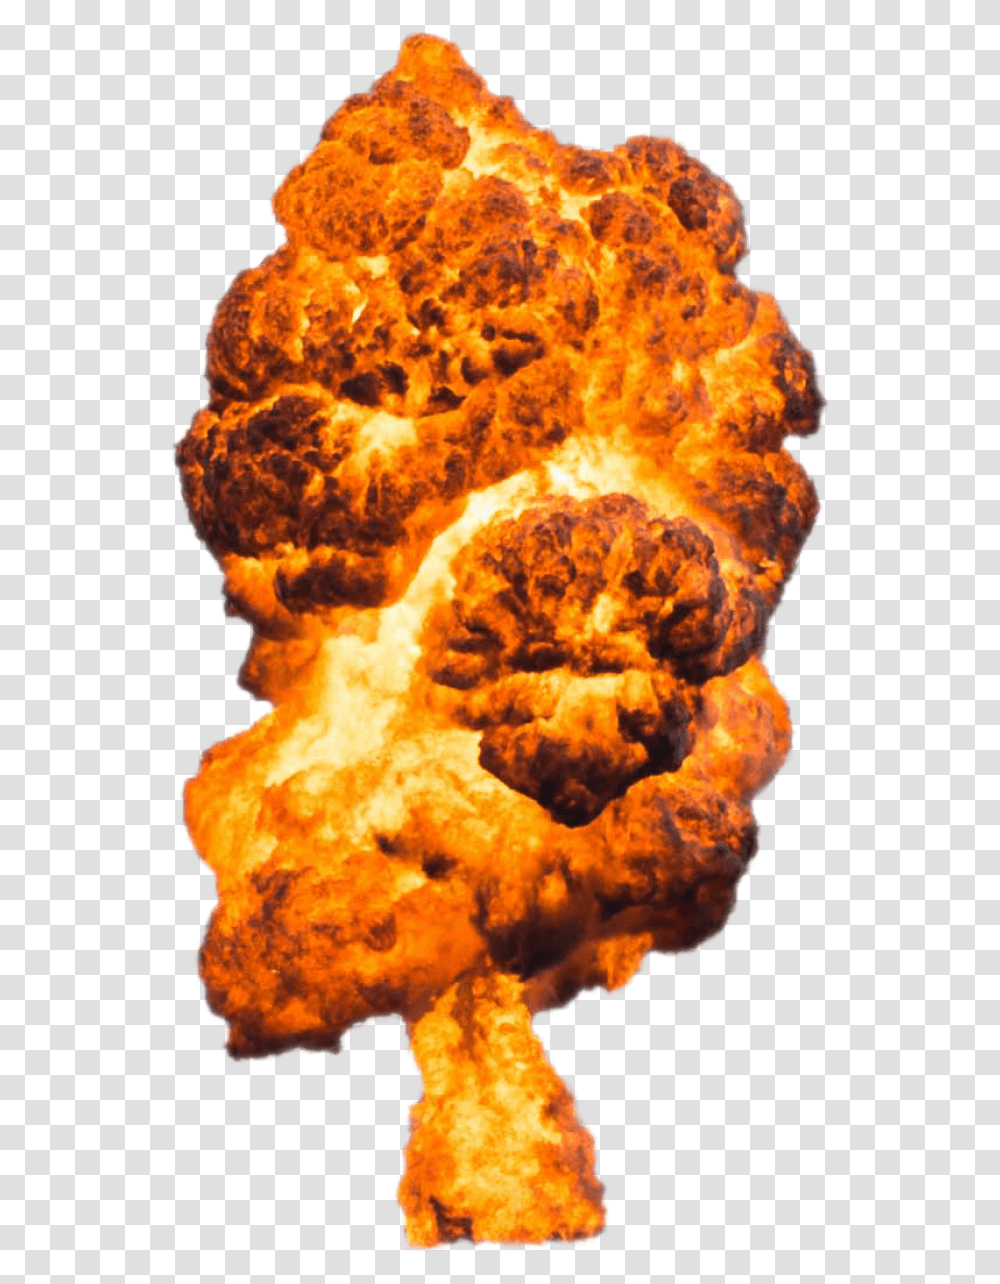 Big Large Fire Explosion Image Blast, Nature, Outdoors, Mountain, Flame Transparent Png